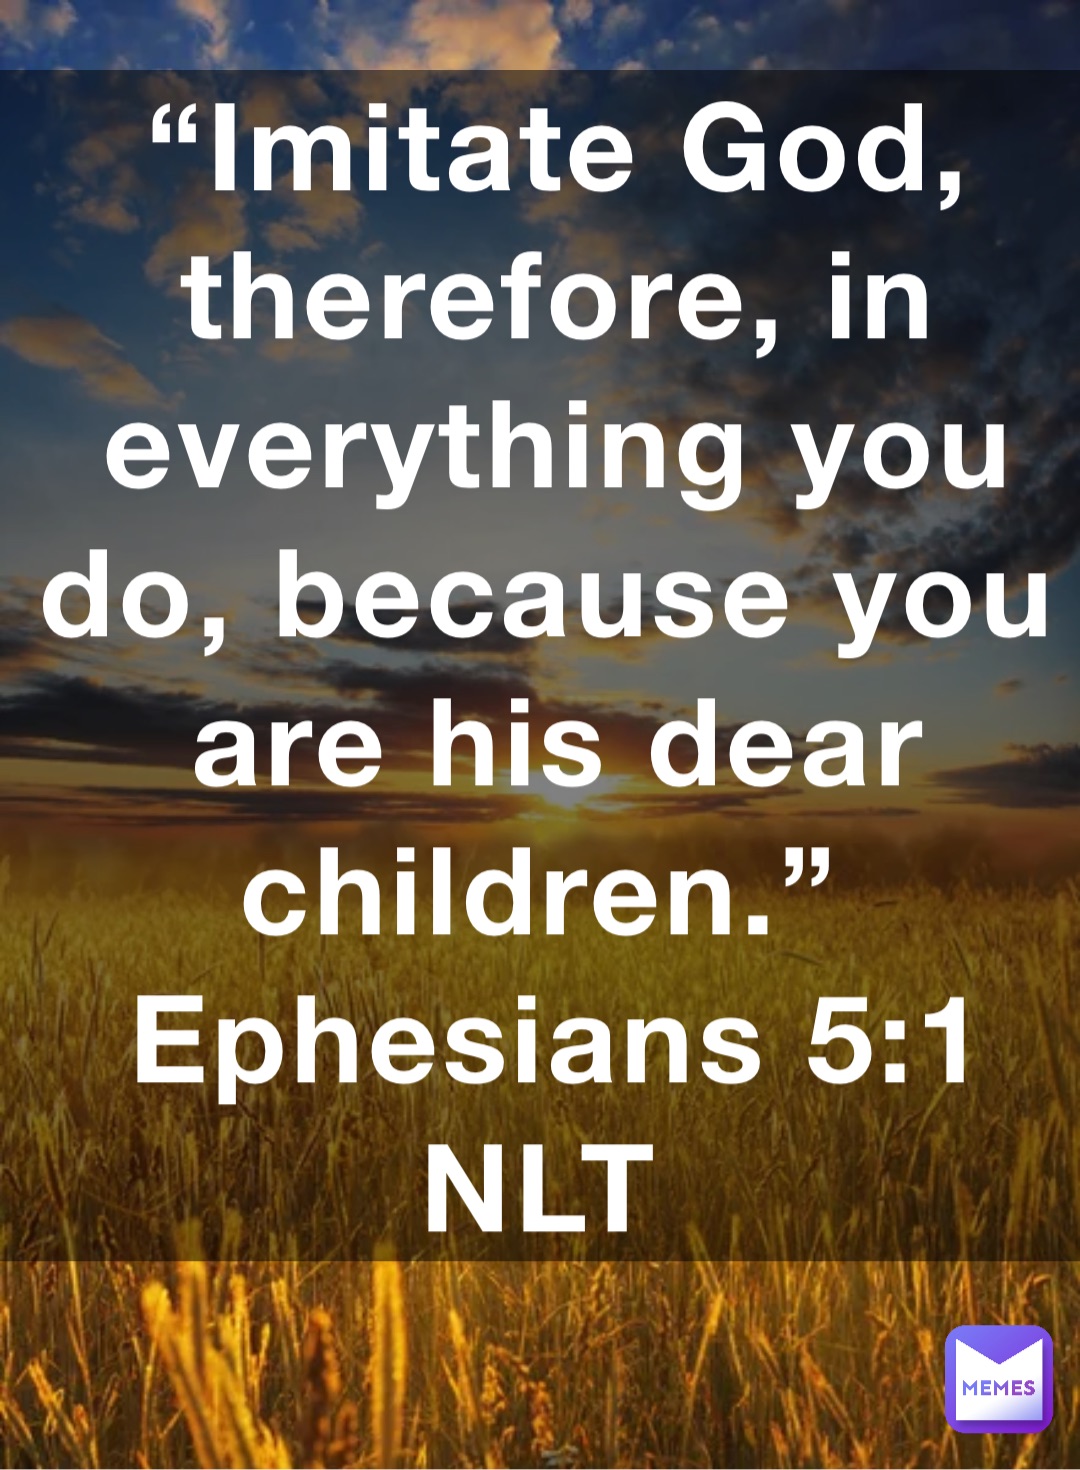 “Imitate God, therefore, in everything you do, because you are his dear children.”
‭‭Ephesians‬ ‭5:1‬ NLT